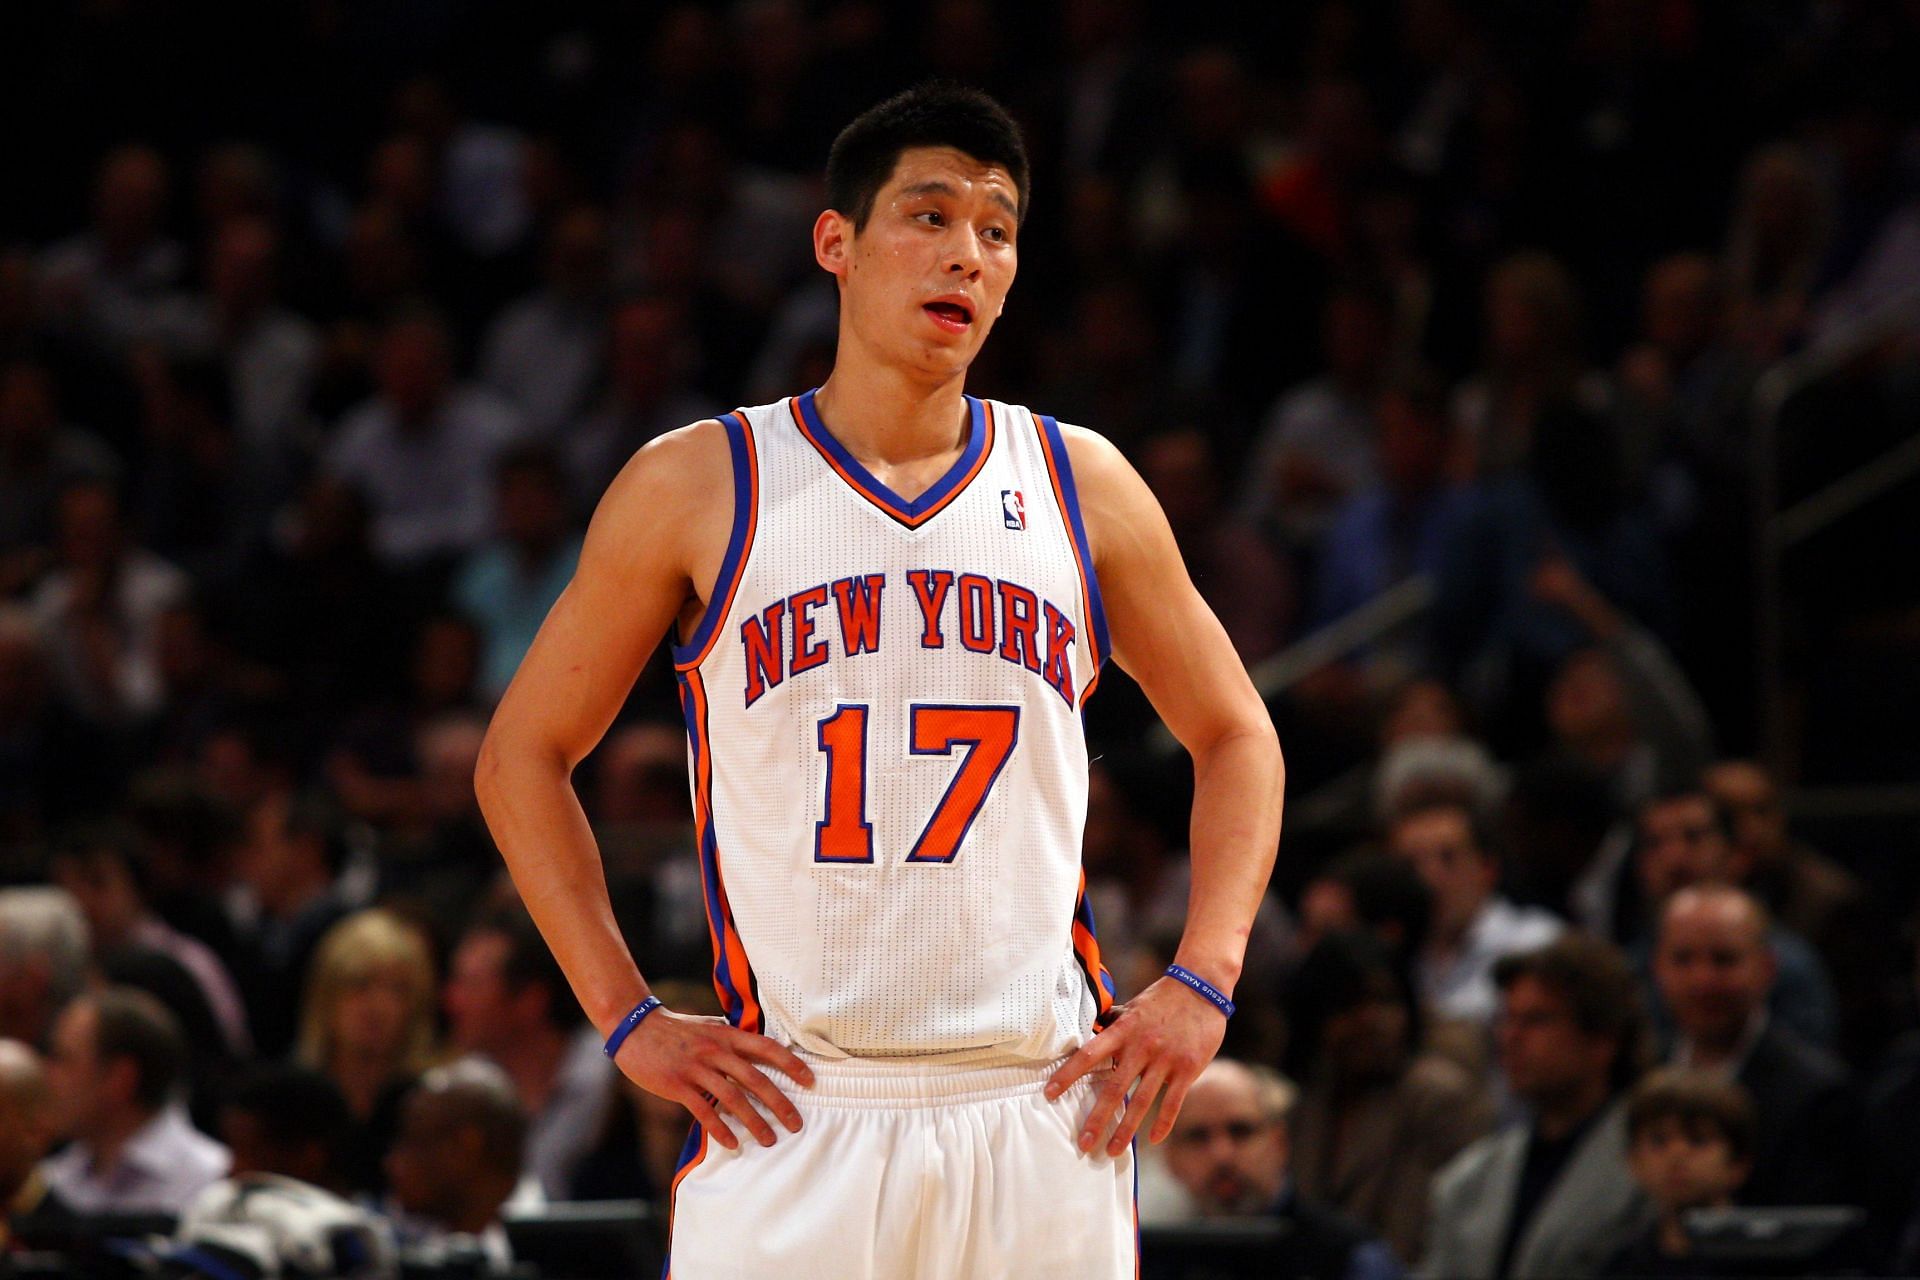 Jeremy Lin captivated the world as a member of the New York Knicks.